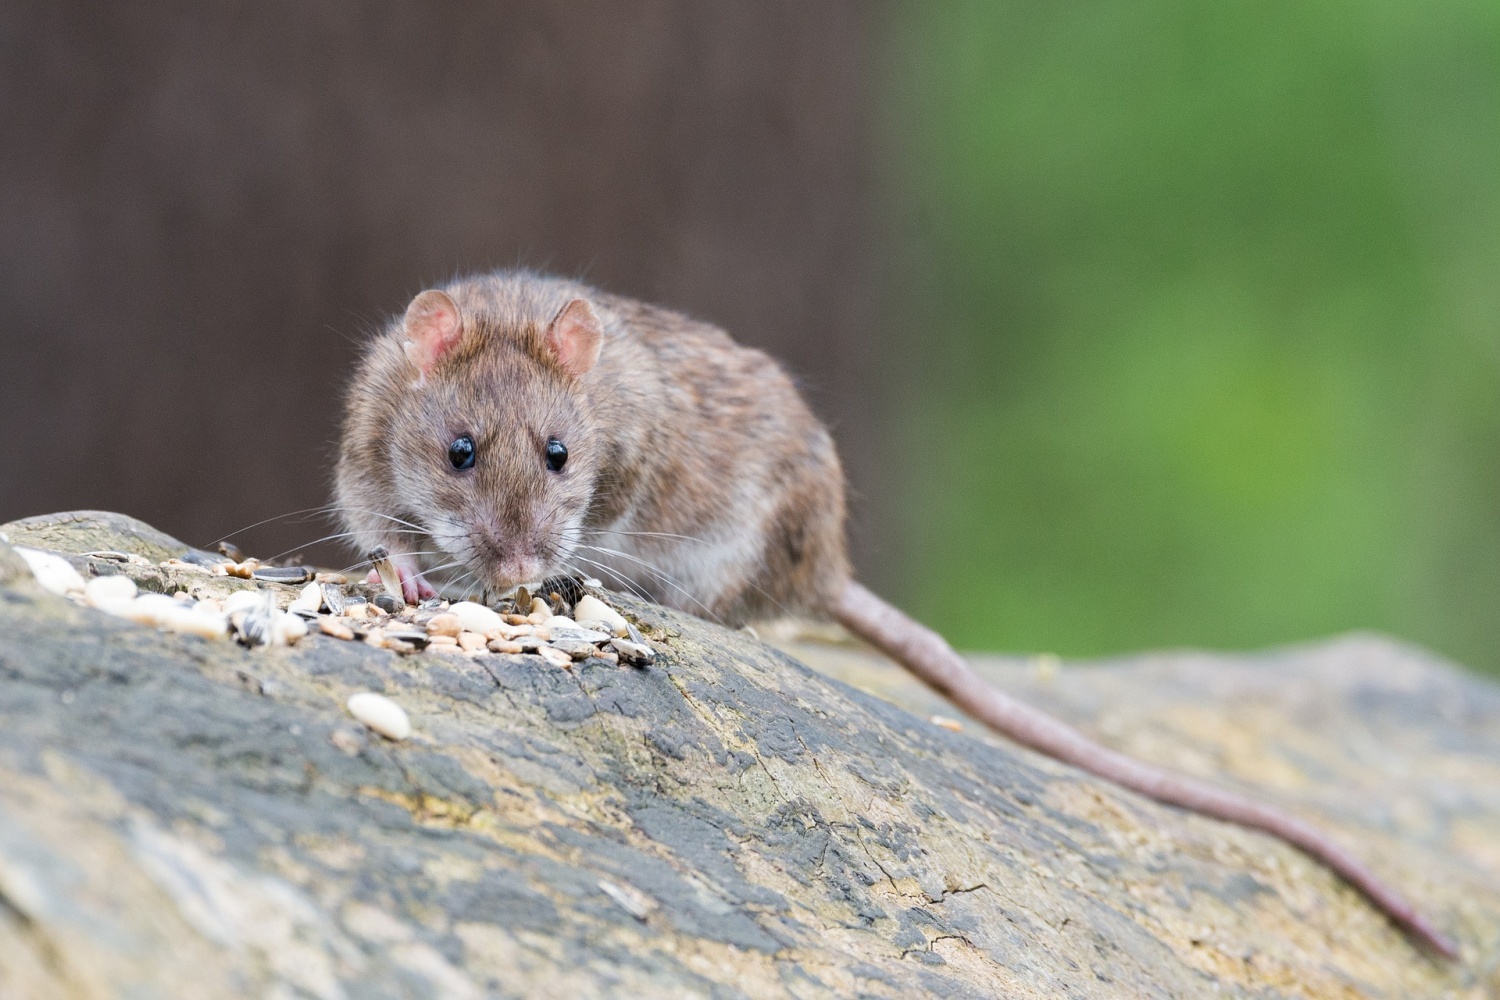 After a Hantavirus-Related Death, Will it Become the Next Pandemic? Thankfully, Experts Don't Think So